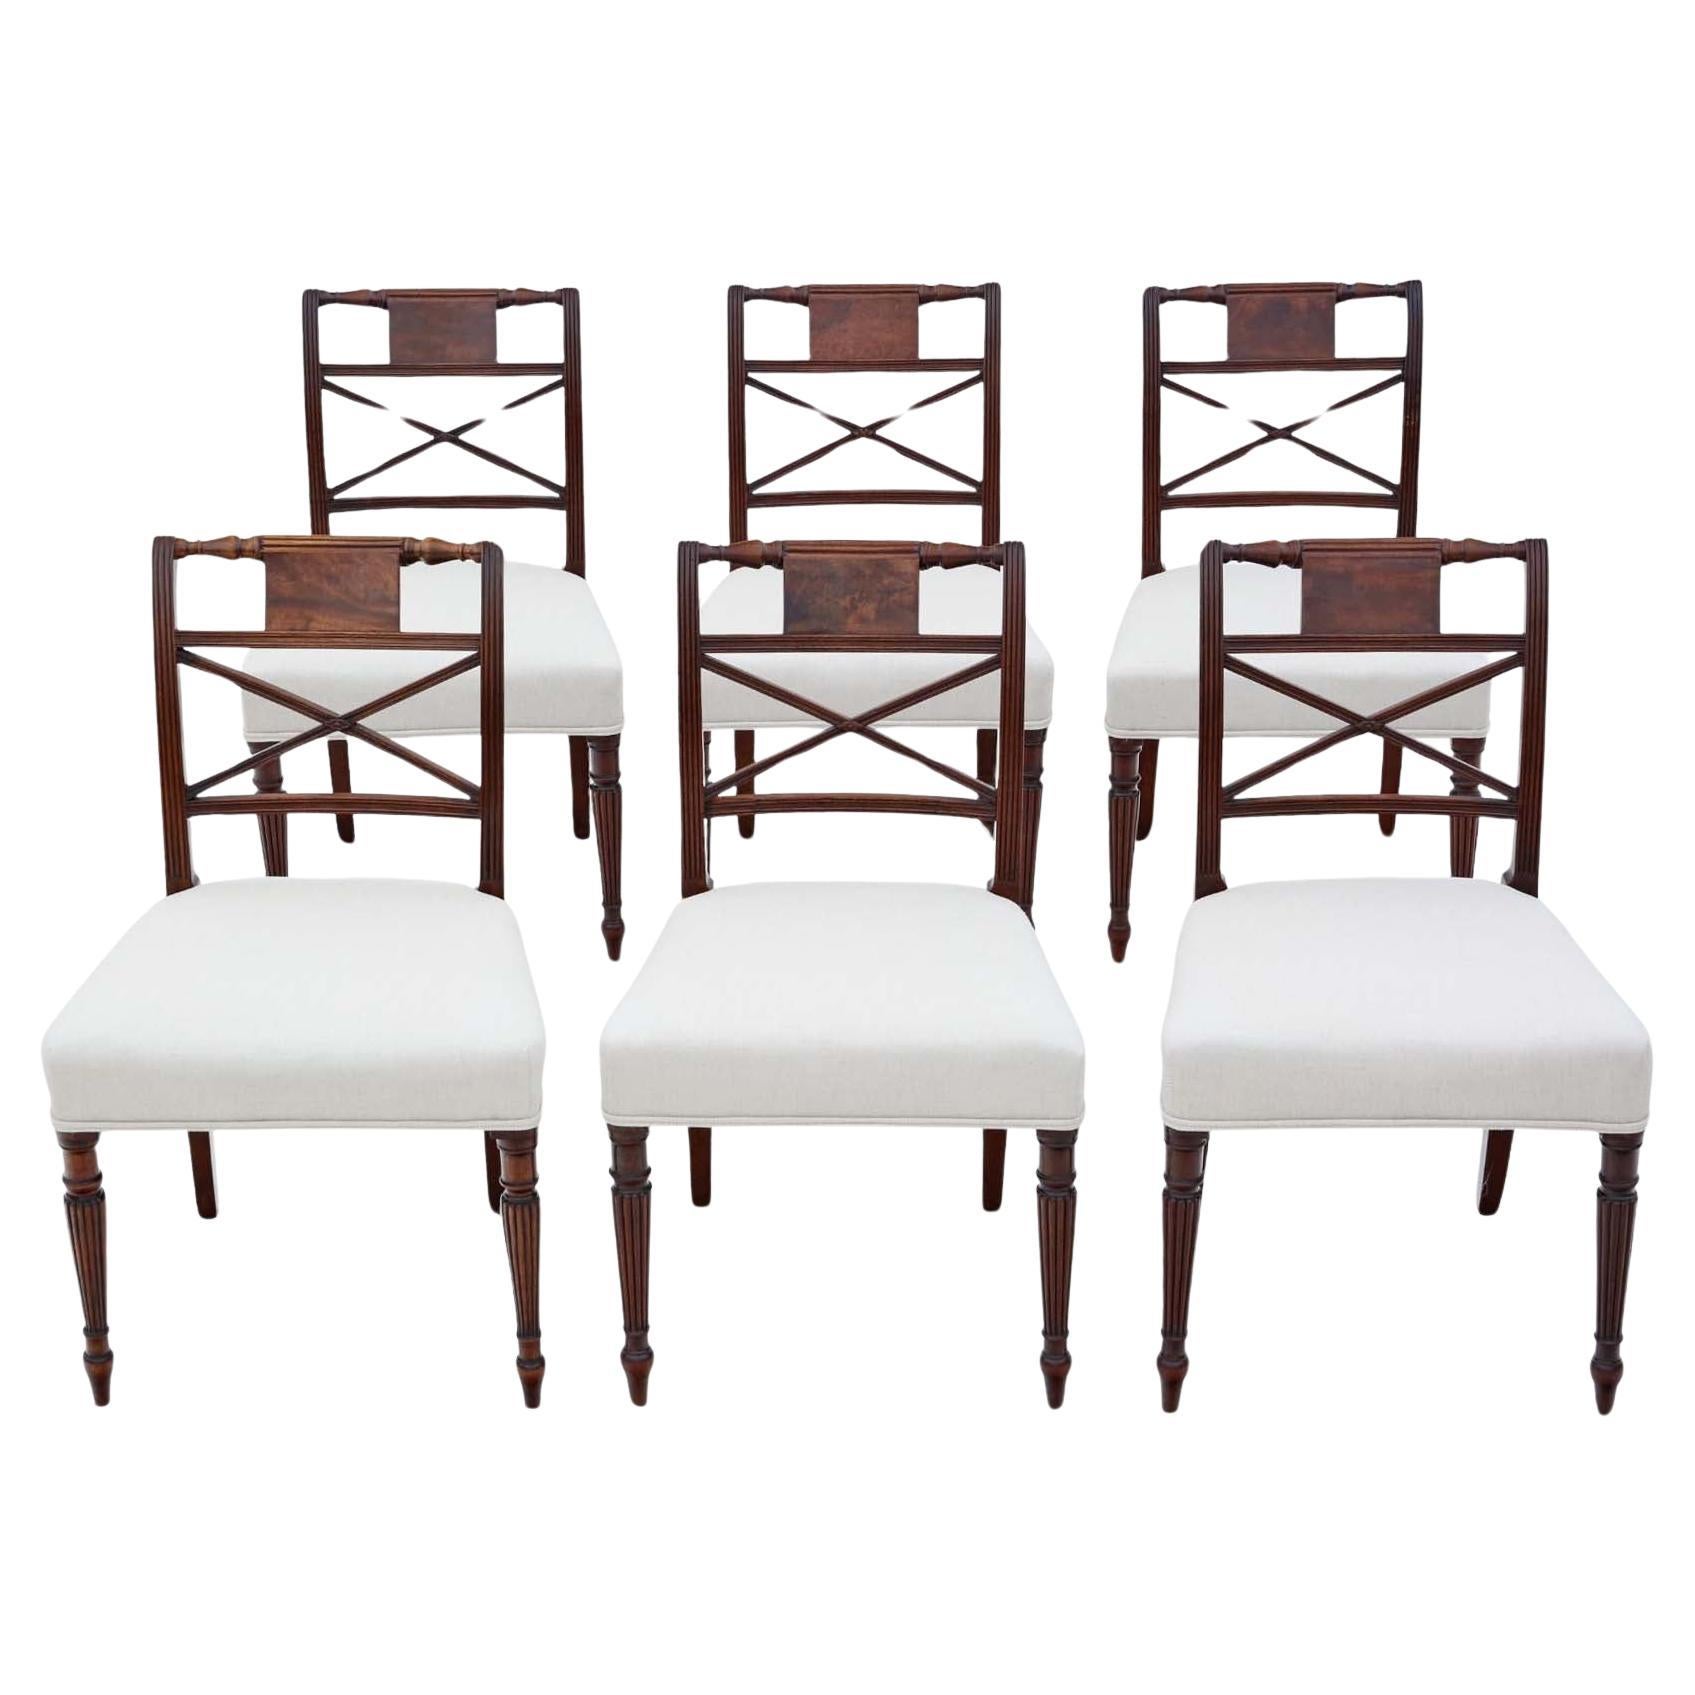 Antique fine quality set of 6 19th Century mahogany dining chairs Gillows 